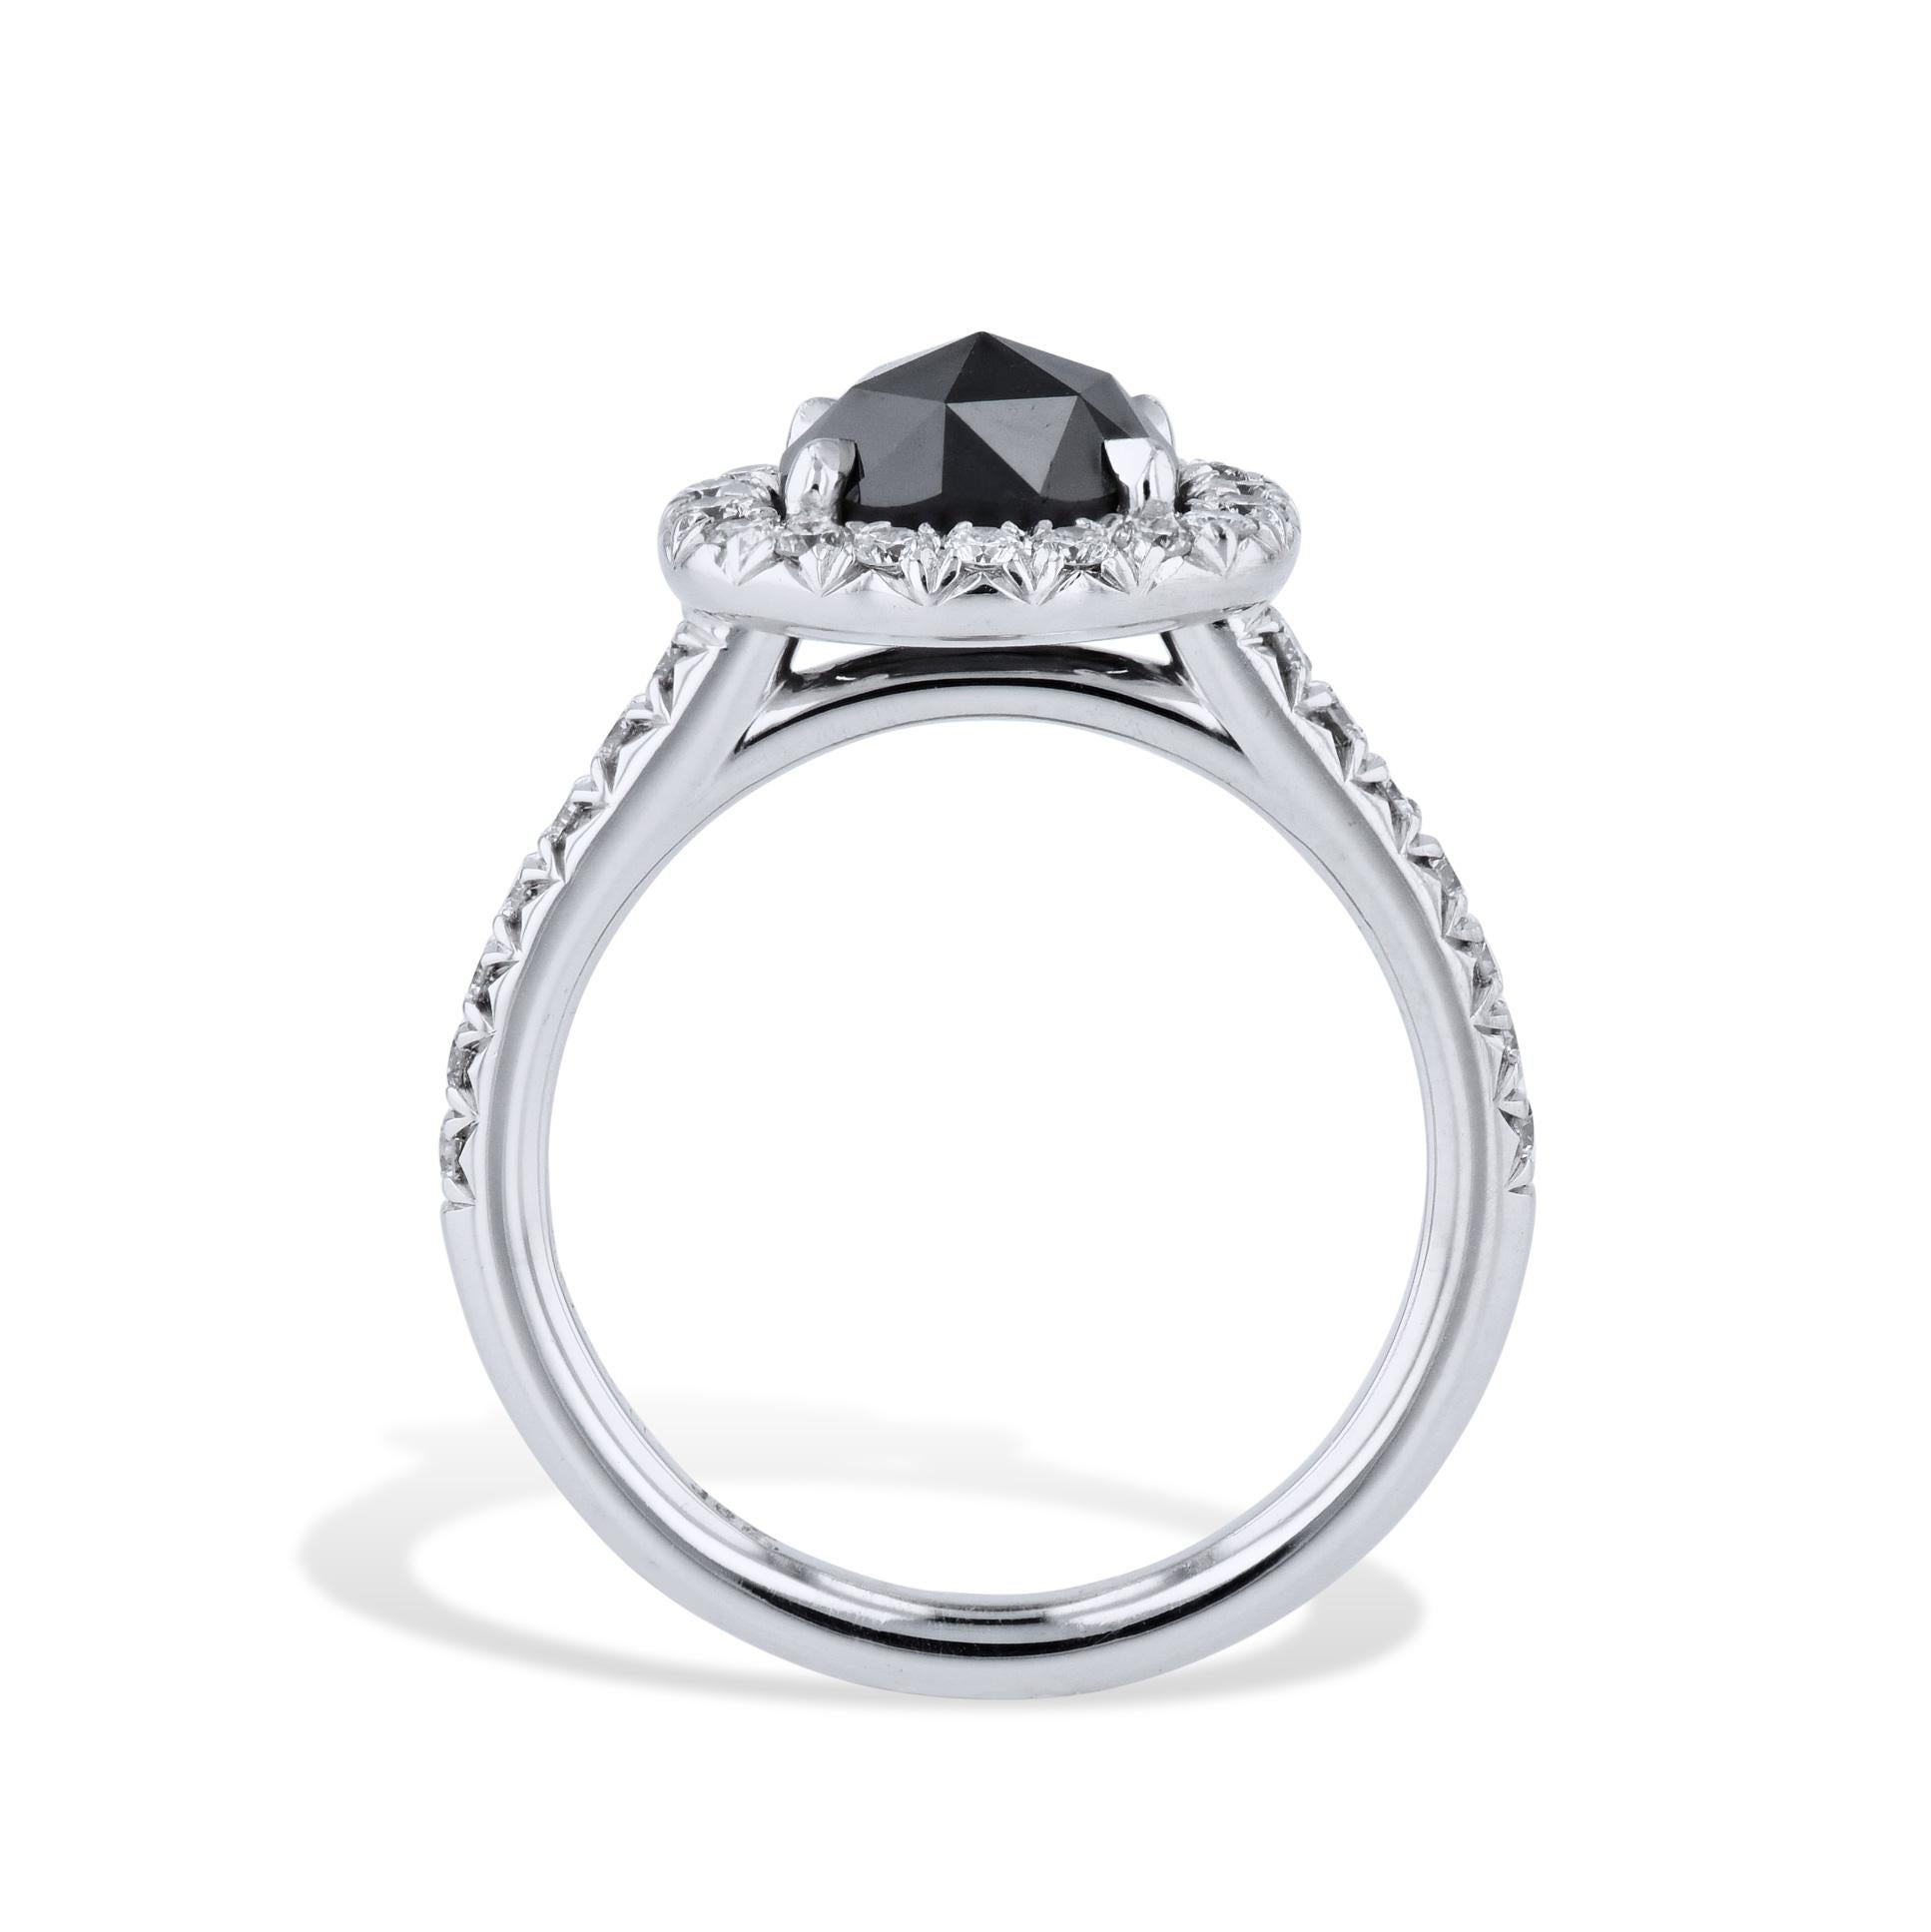 This stunning black diamond ring is hand crafted with 18kt white gold. Further embellished with diamond pave around the black diamond and down the shank, it is sure to captivate from every angle. An exquisite handmade piece from the HH